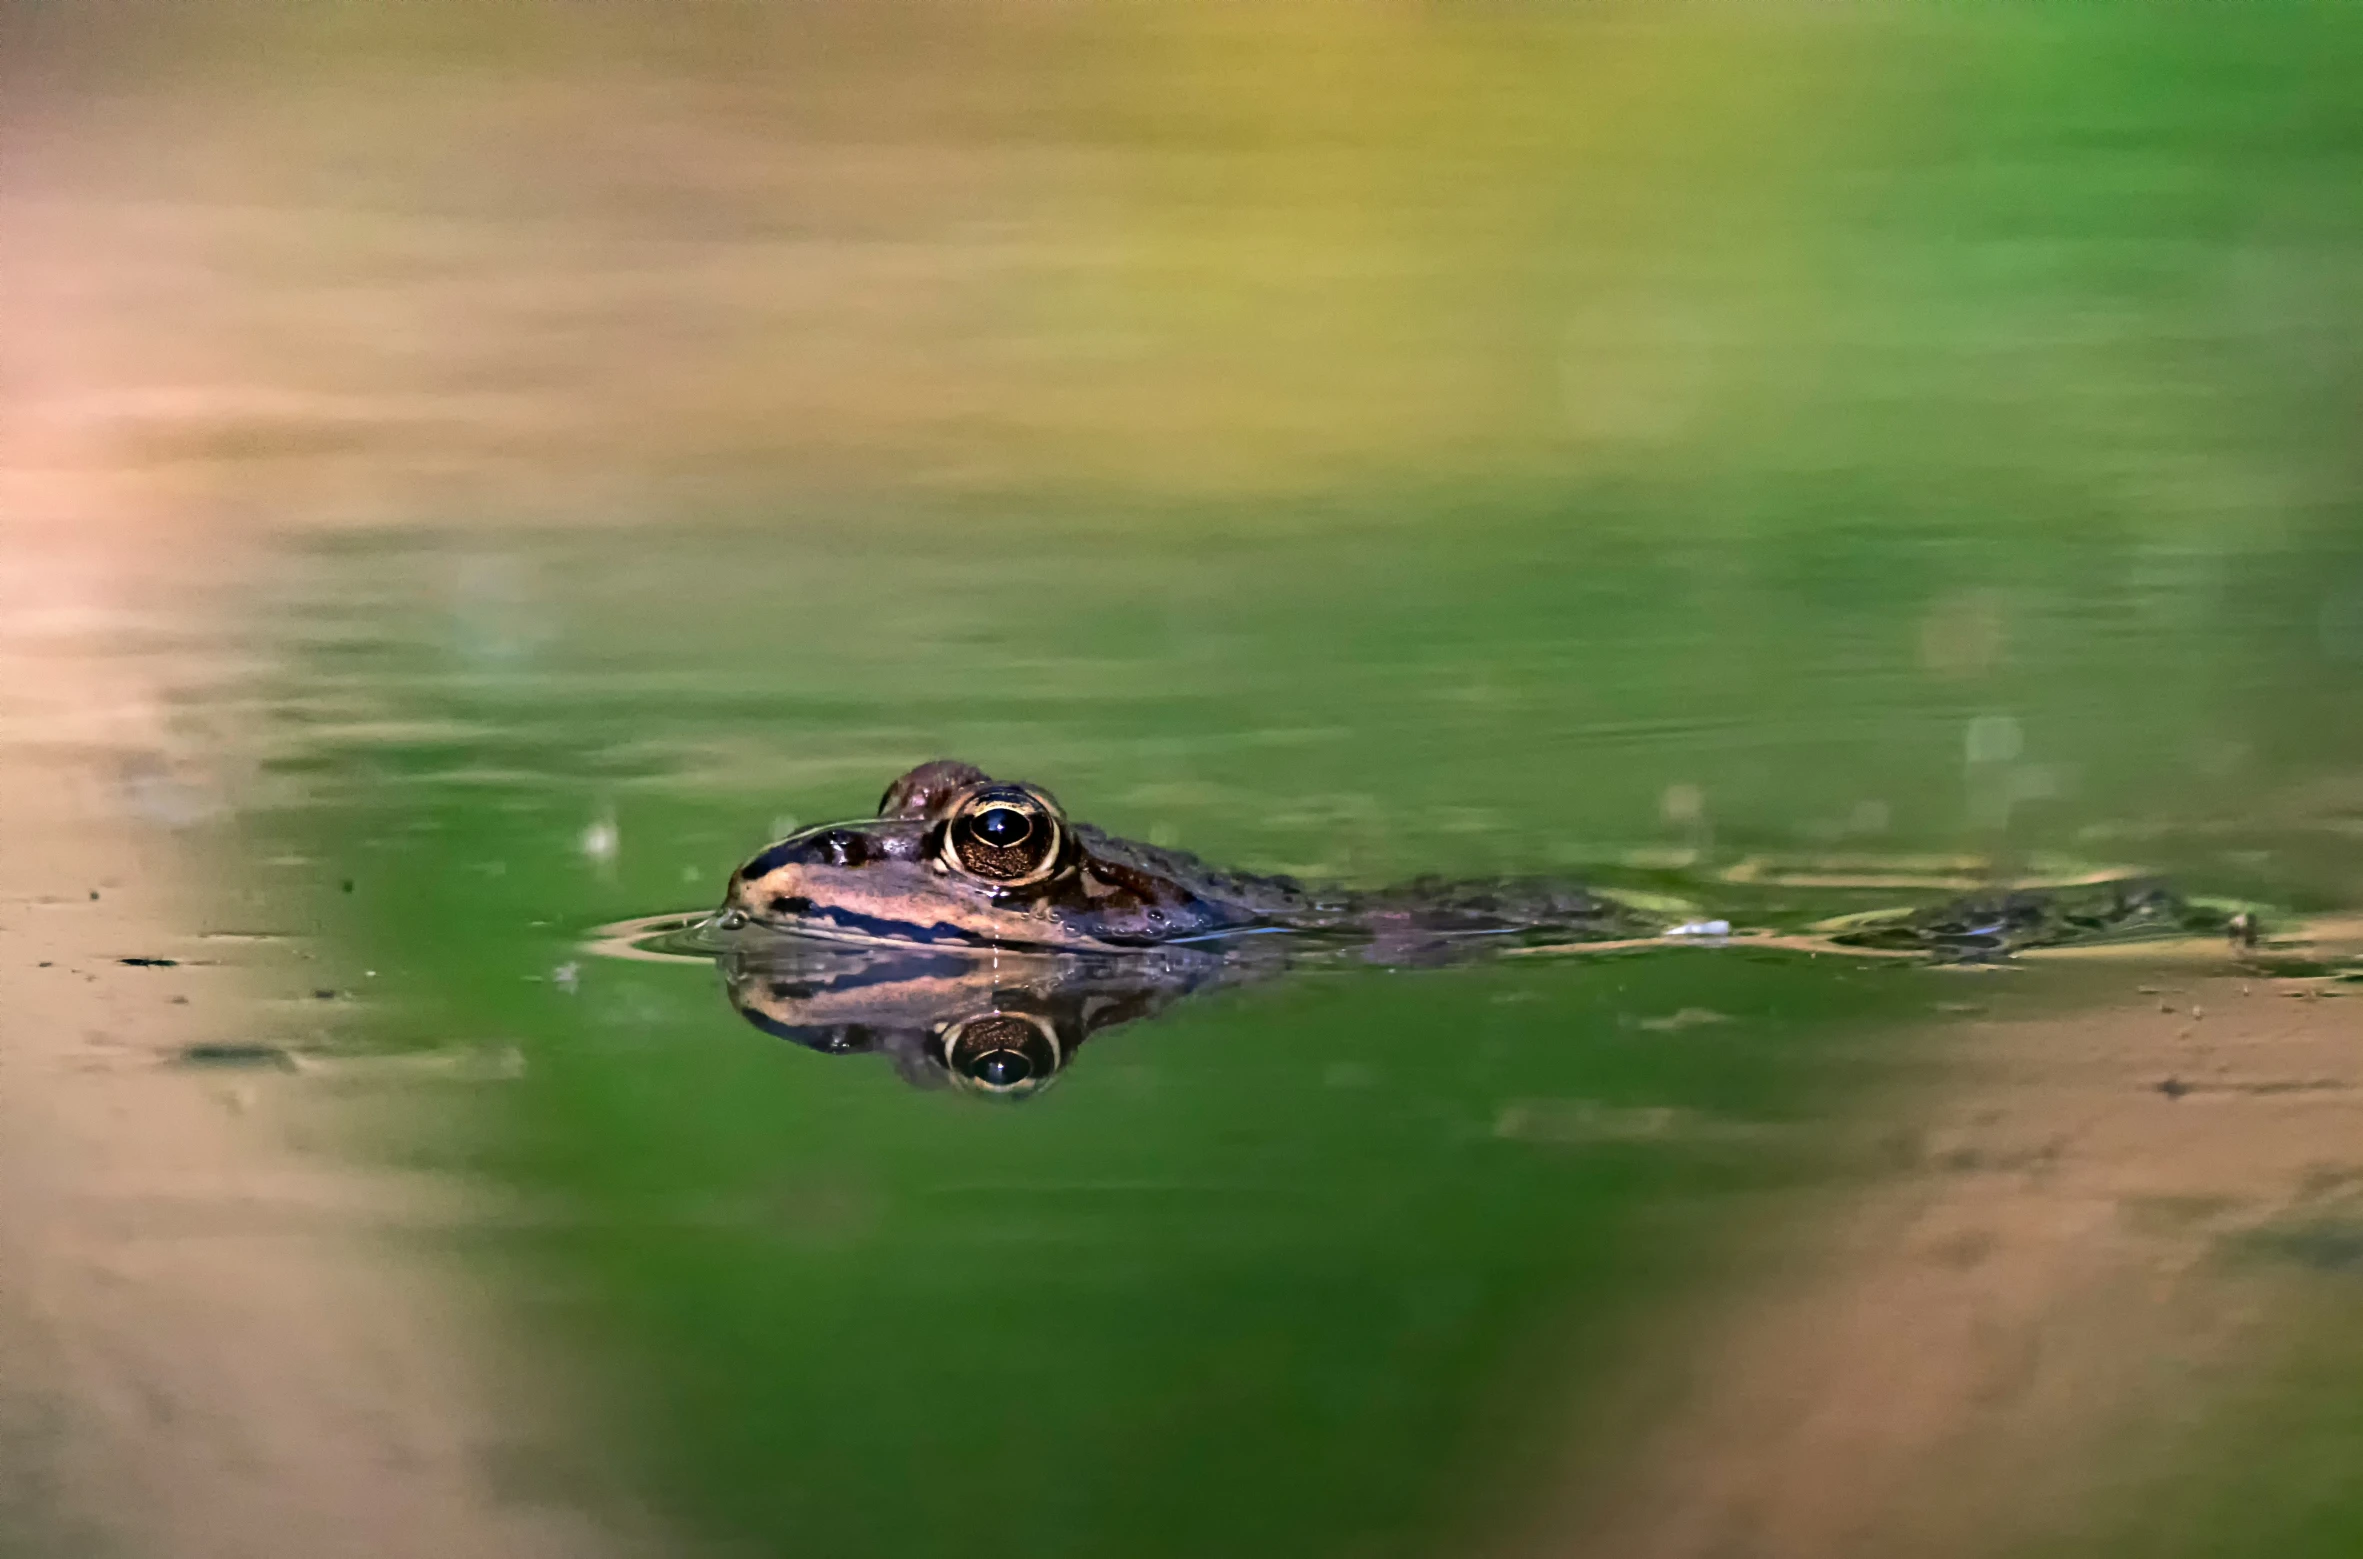 a big frog in the water with its eyes open